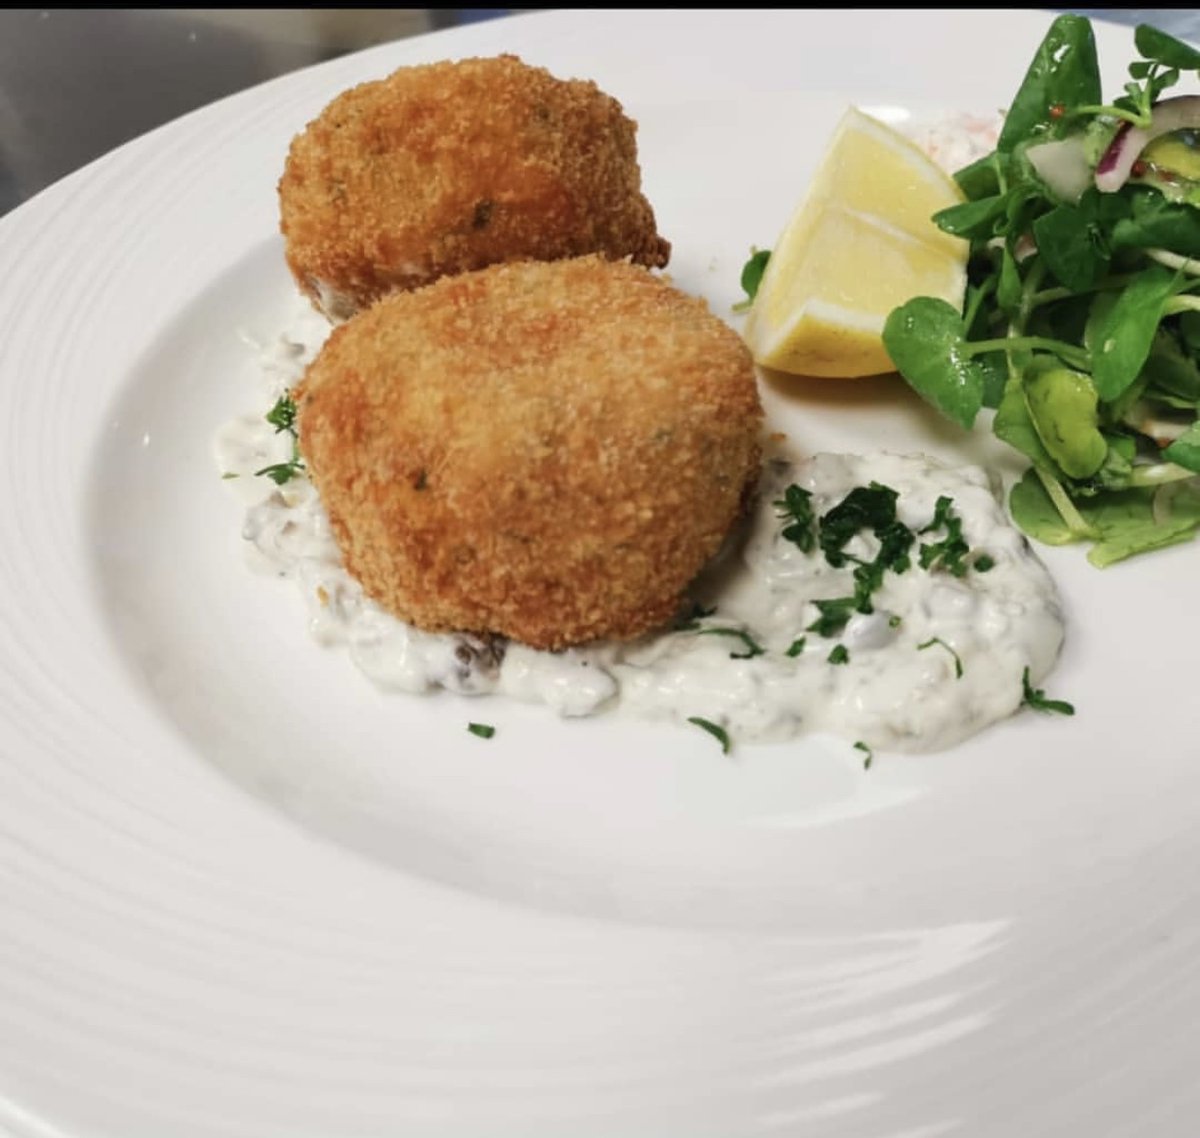 Hitting the specials today ! Hot Smoked Salmon Fishcakes with homemade Tartar Sauce by our amazing chef Tommasso #kemps #stanleypark #freshfood #amazingchefs